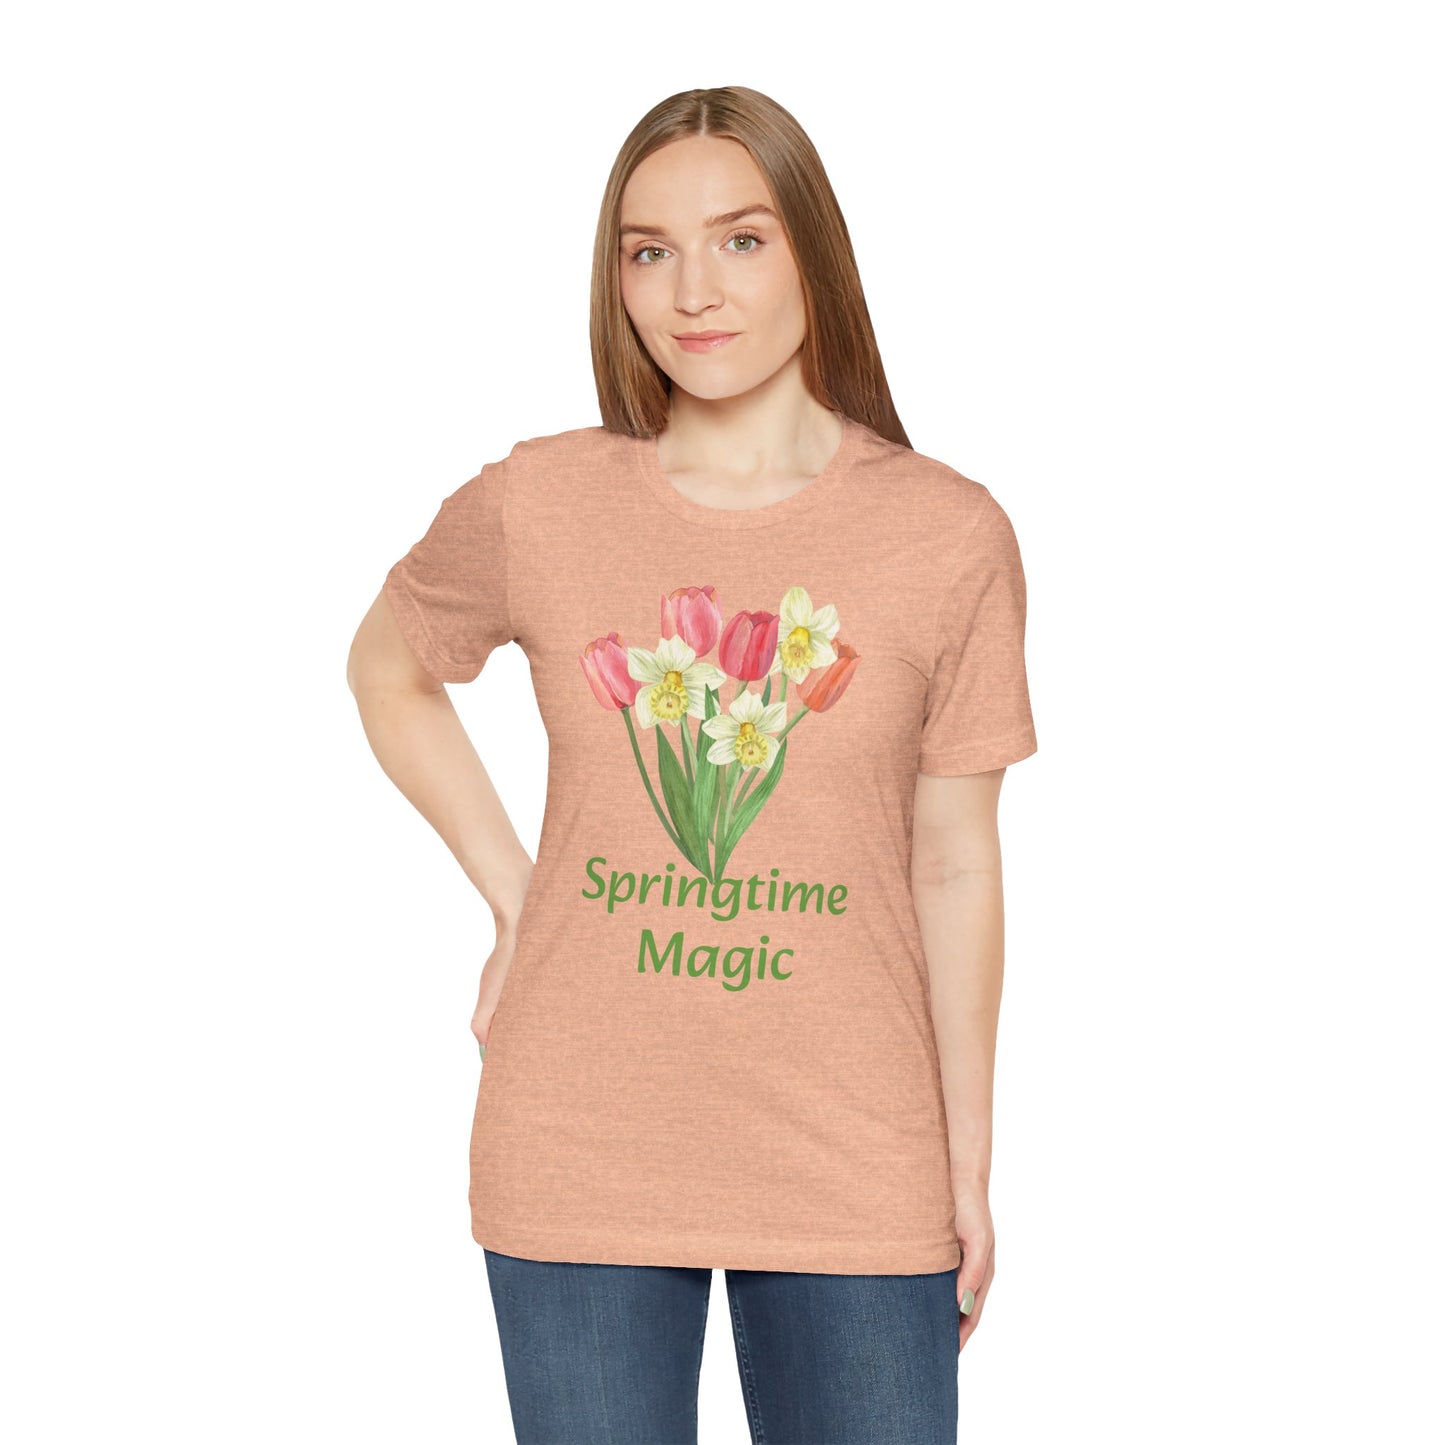 Woman wearing a Unisex Springtime-Magic T-shirt with a floral design and the words "springtime magic" by Bella + Canvas from Printify.